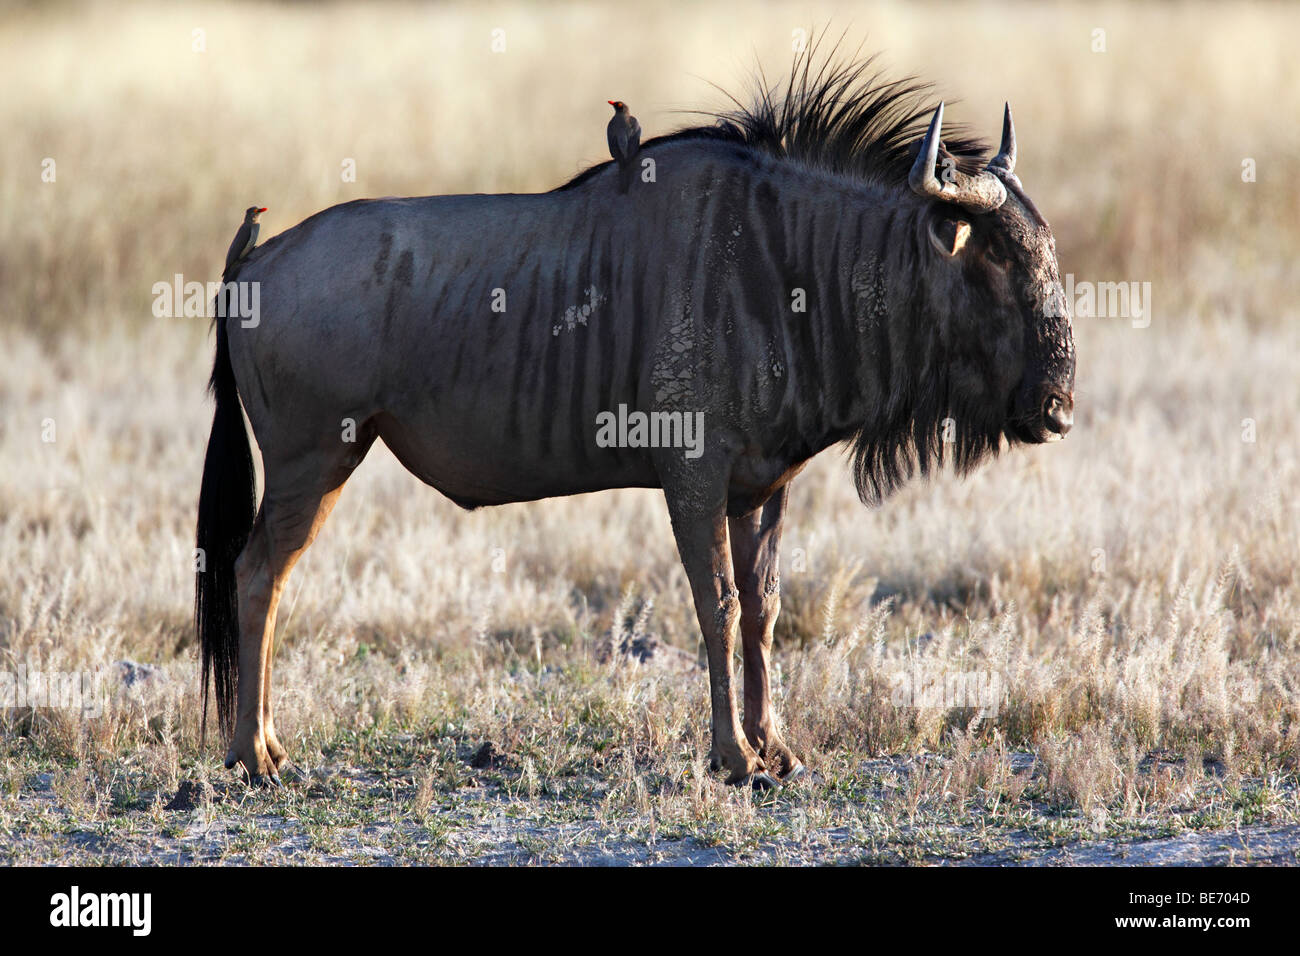 Blue Wildebeest (Connochaetes taurinus) with Oxpecker birds feeding on parasites in its fur - in Etosha National Park in Namibia Stock Photo